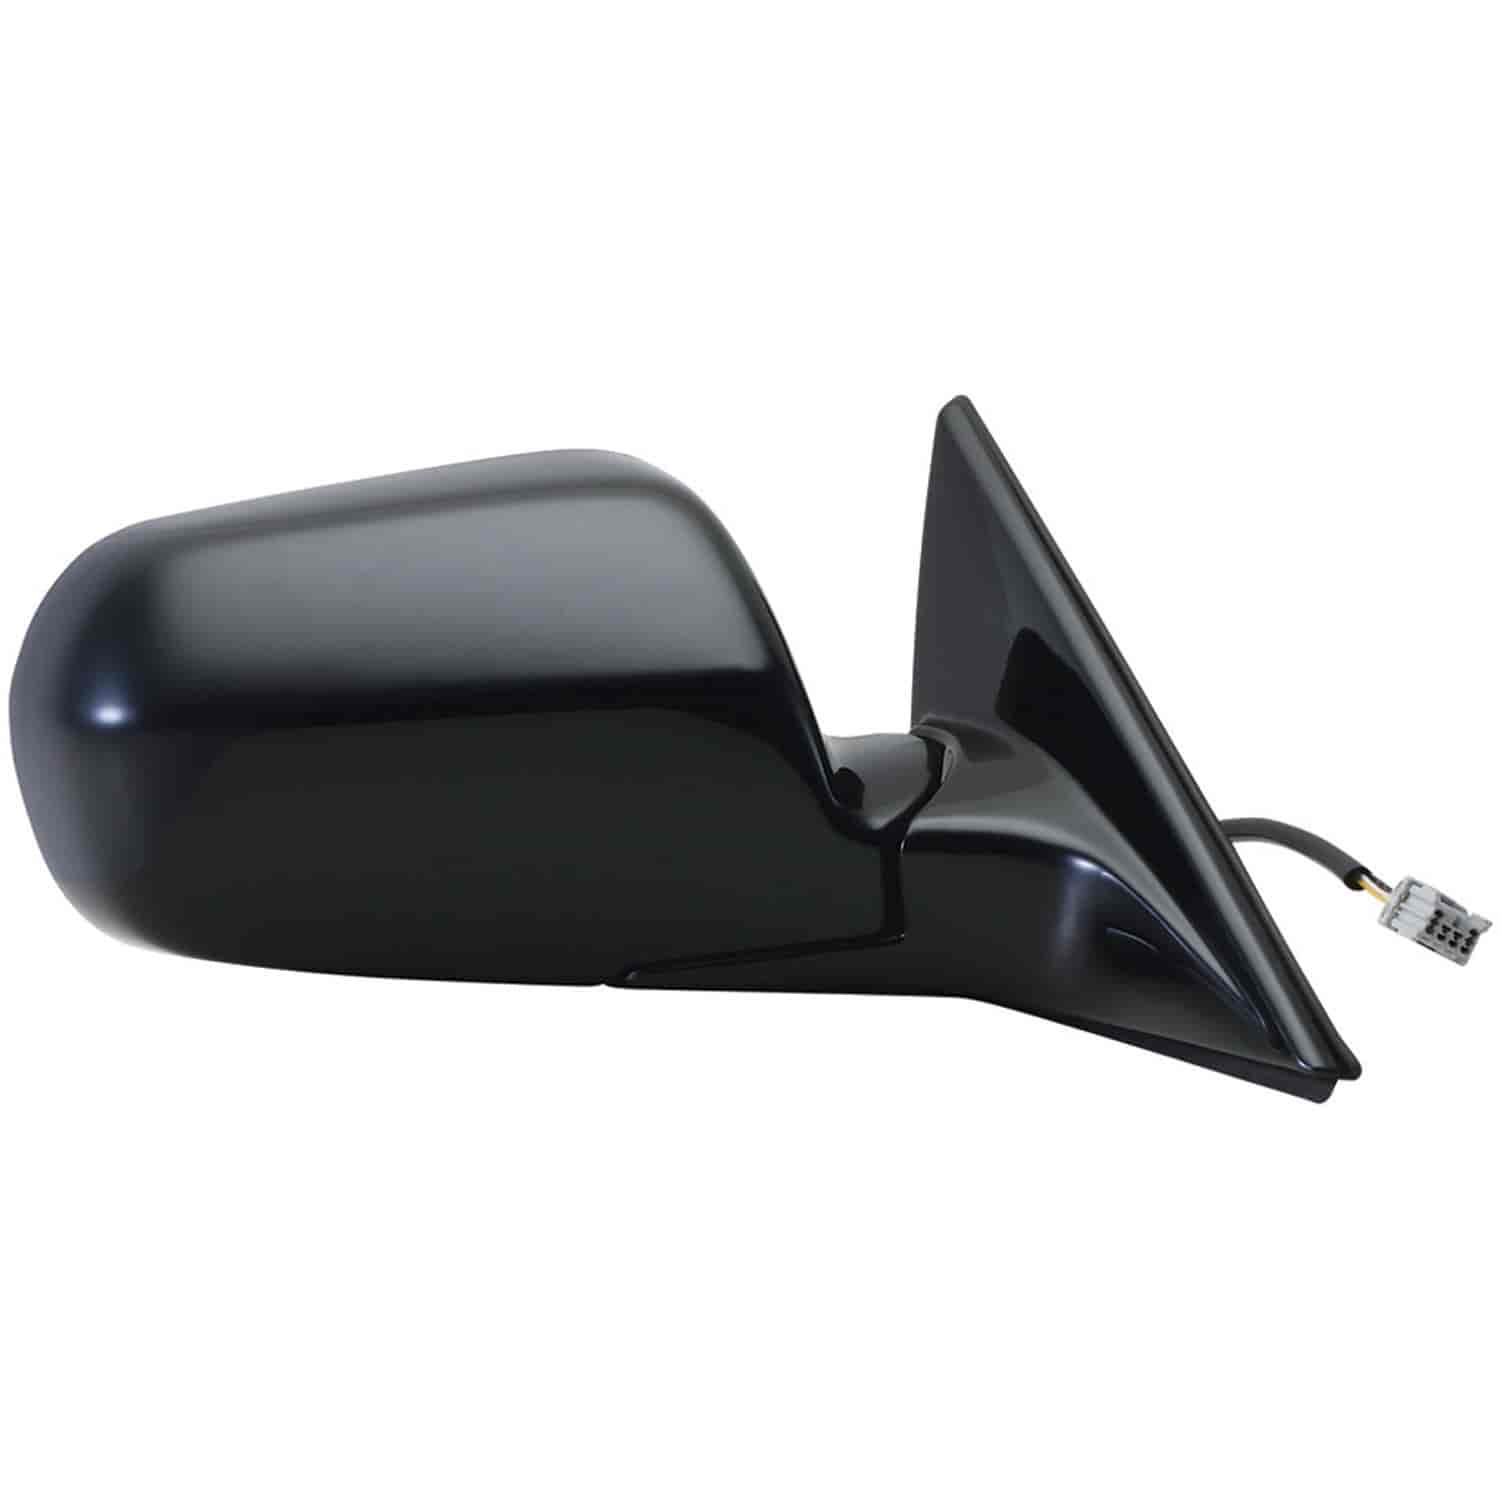 OEM Style Replacement mirror for 99-01 ACURA TL 4 door sedan passenger side mirror tested to fit and